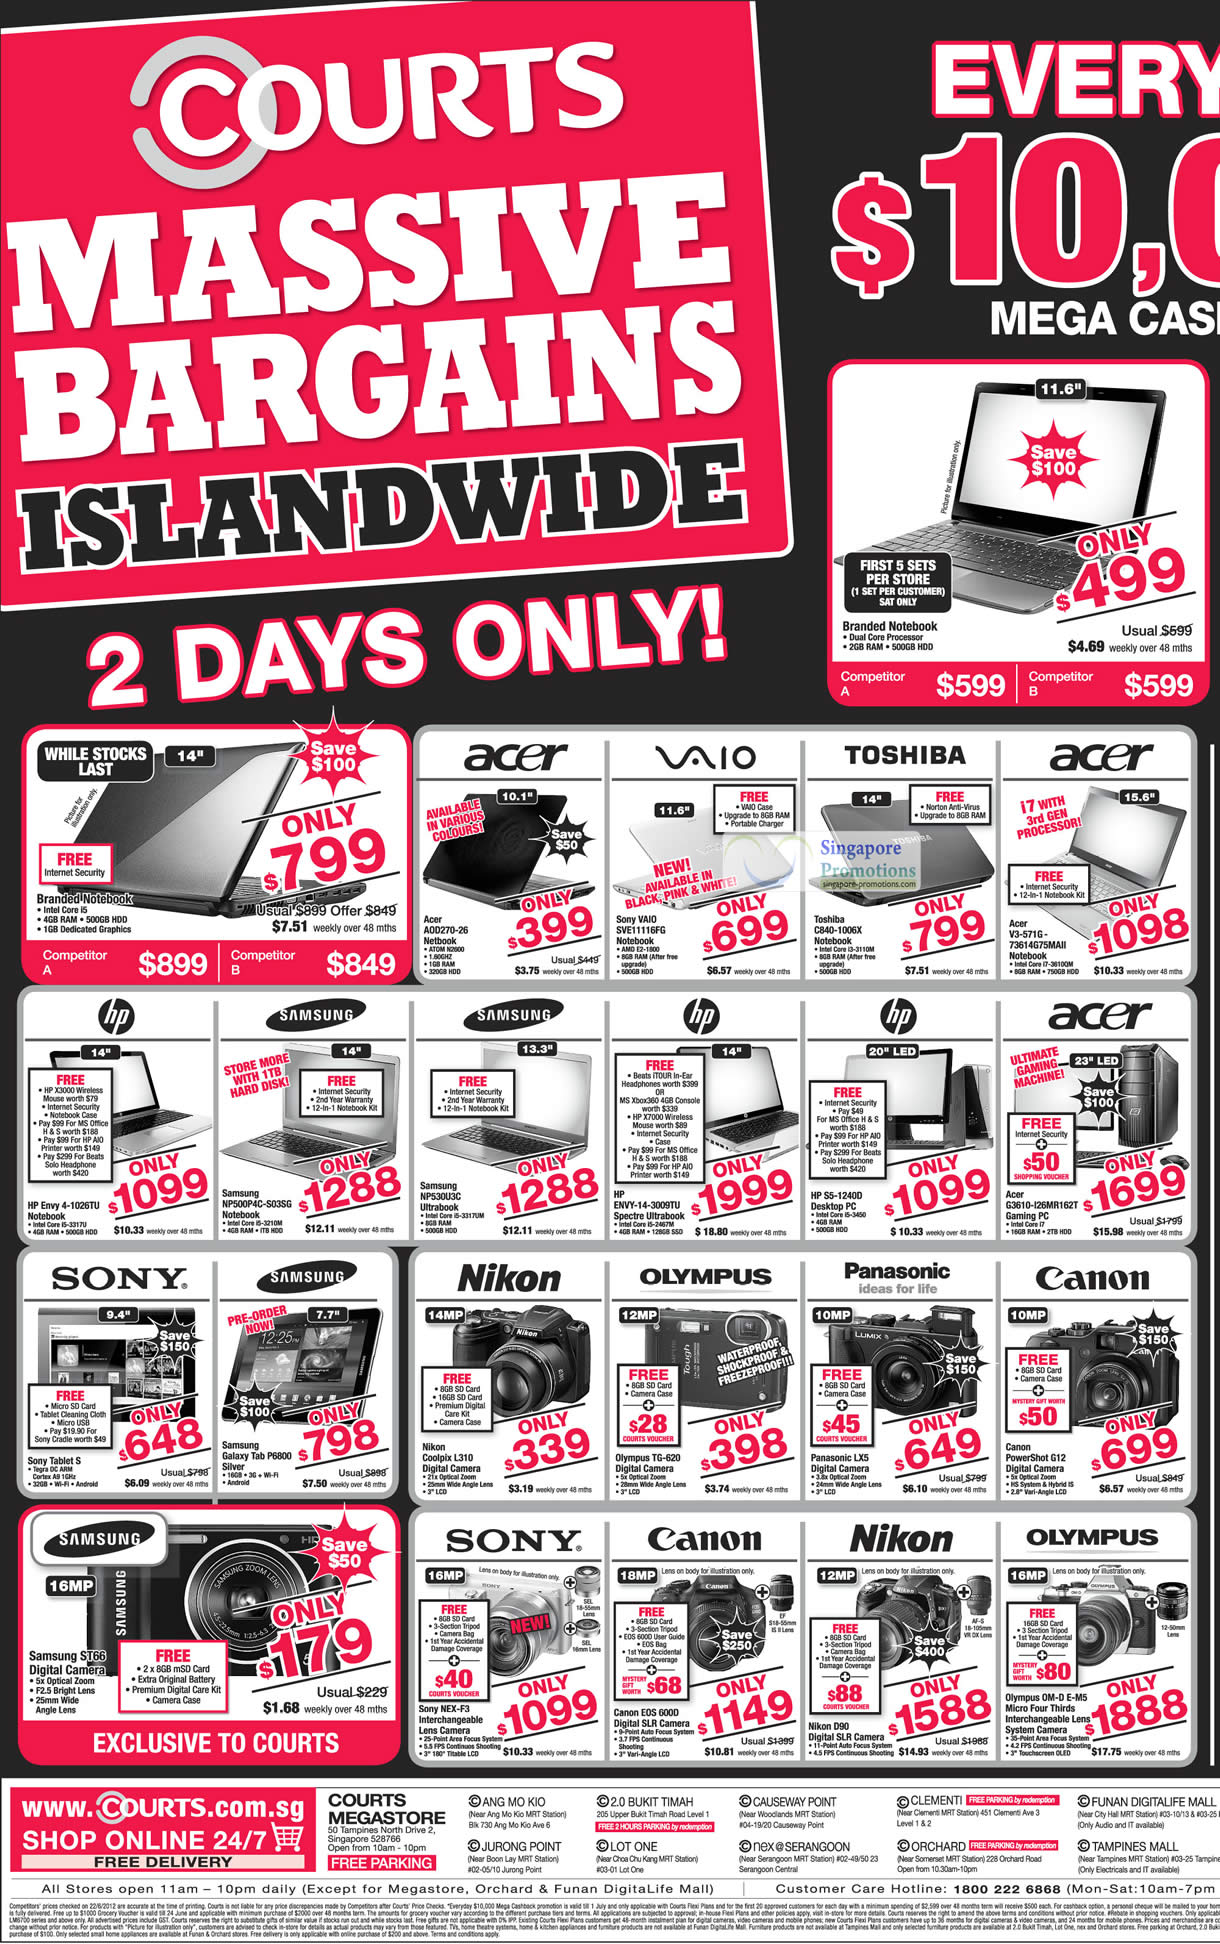 Featured image for Courts Massive Bargains Islandwide Promotion 23 - 29 Jun 2012